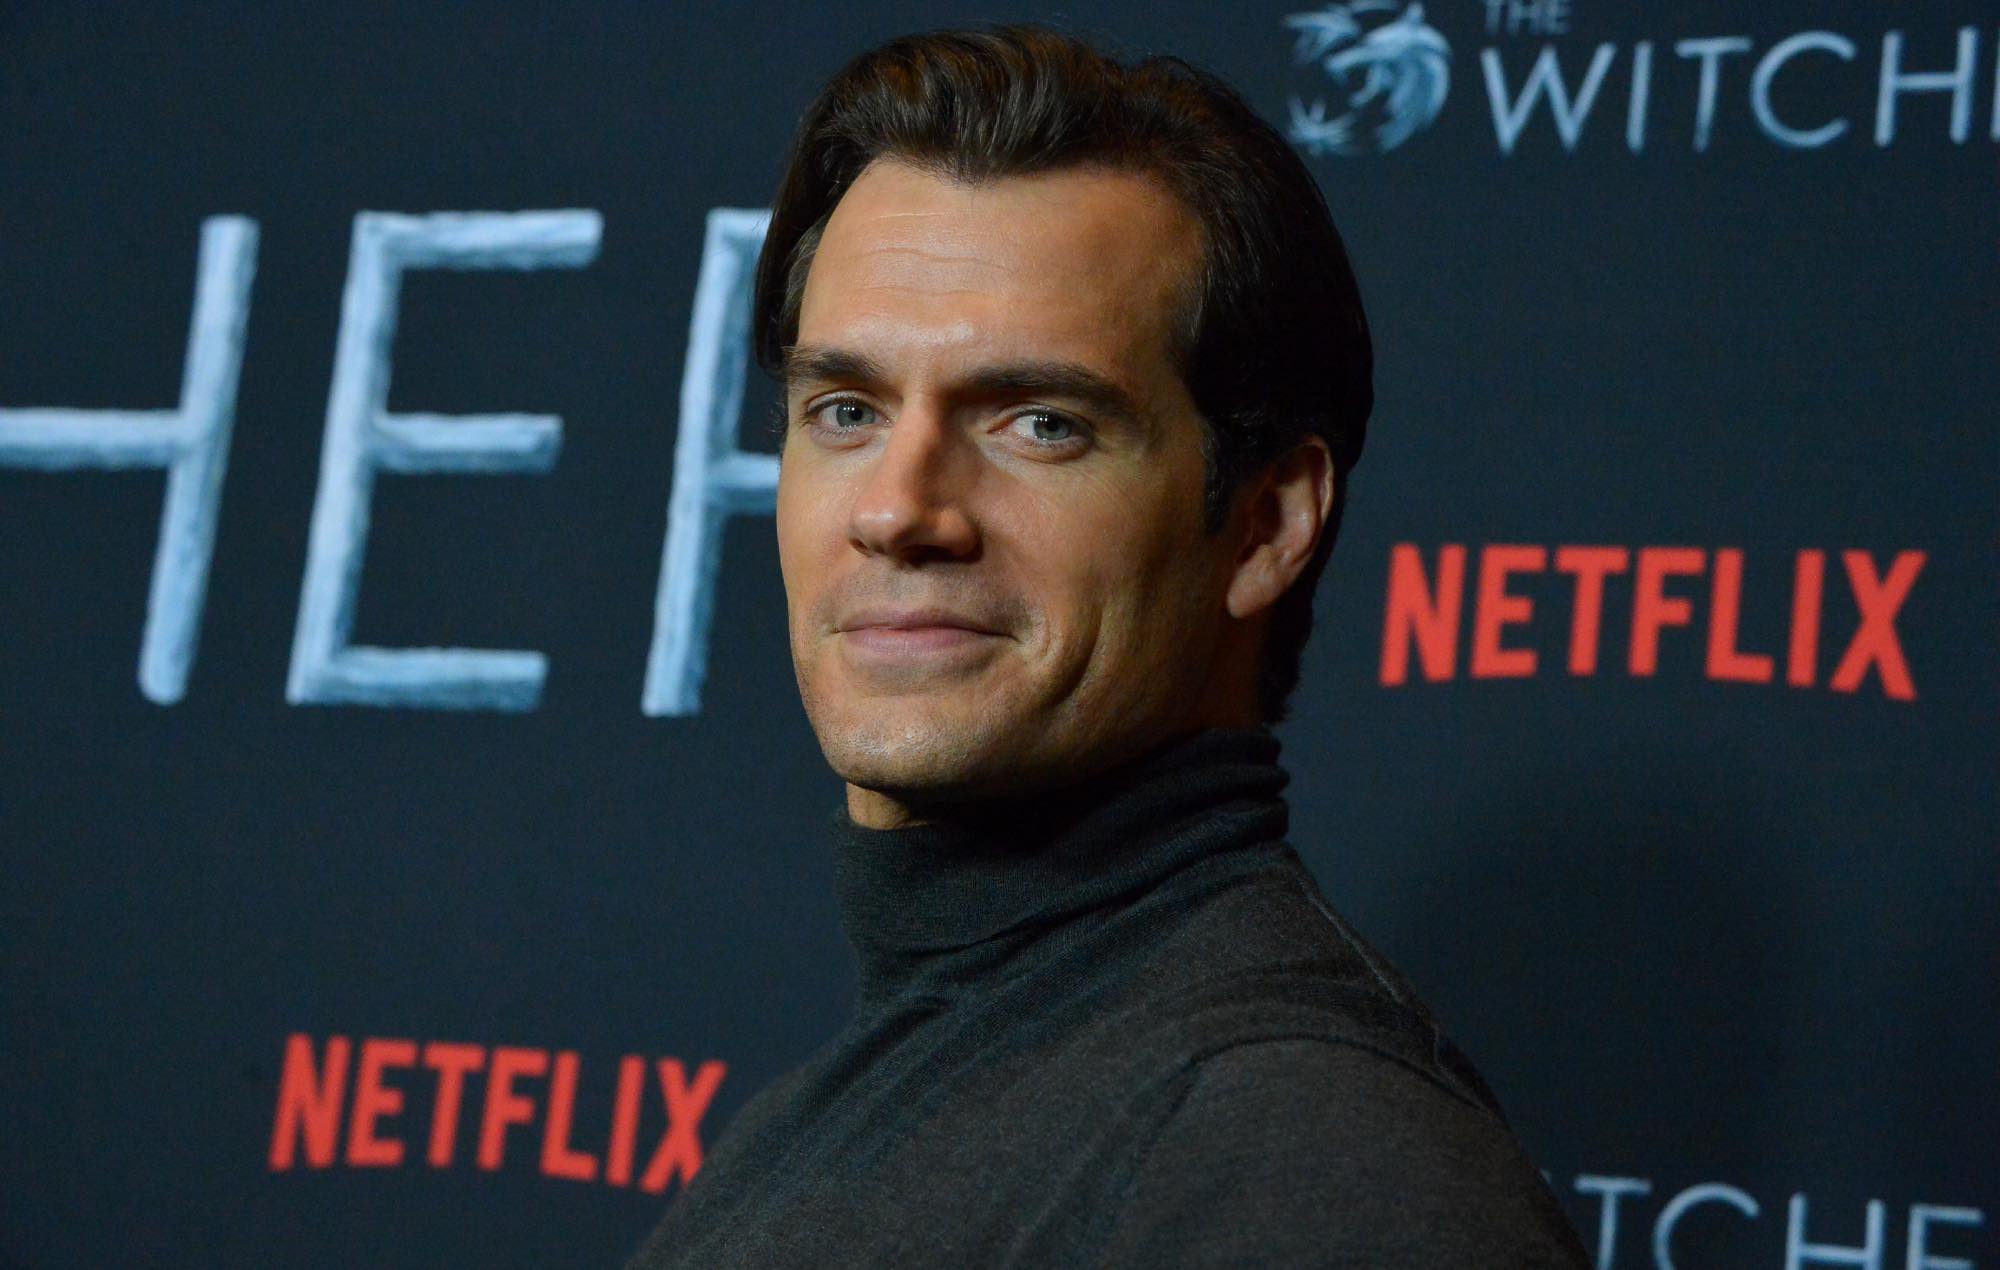 Henry Cavill says he may be “too old now” to play James Bond